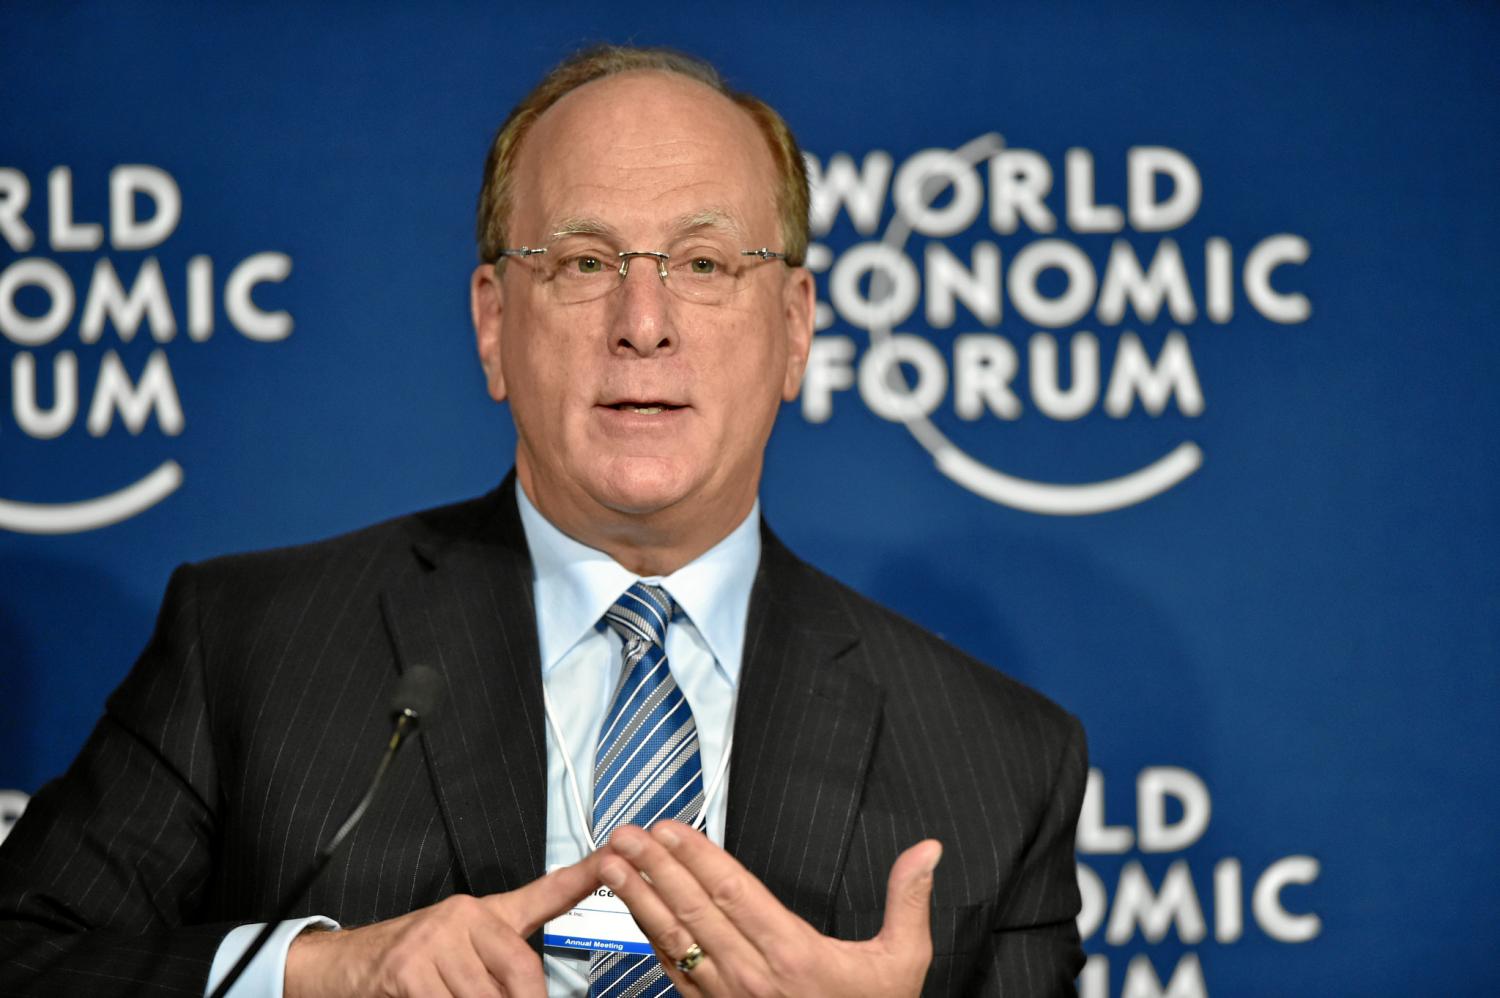 Larry Fink is in the news again, urging business to step into a leadership vacuum in a divided world.